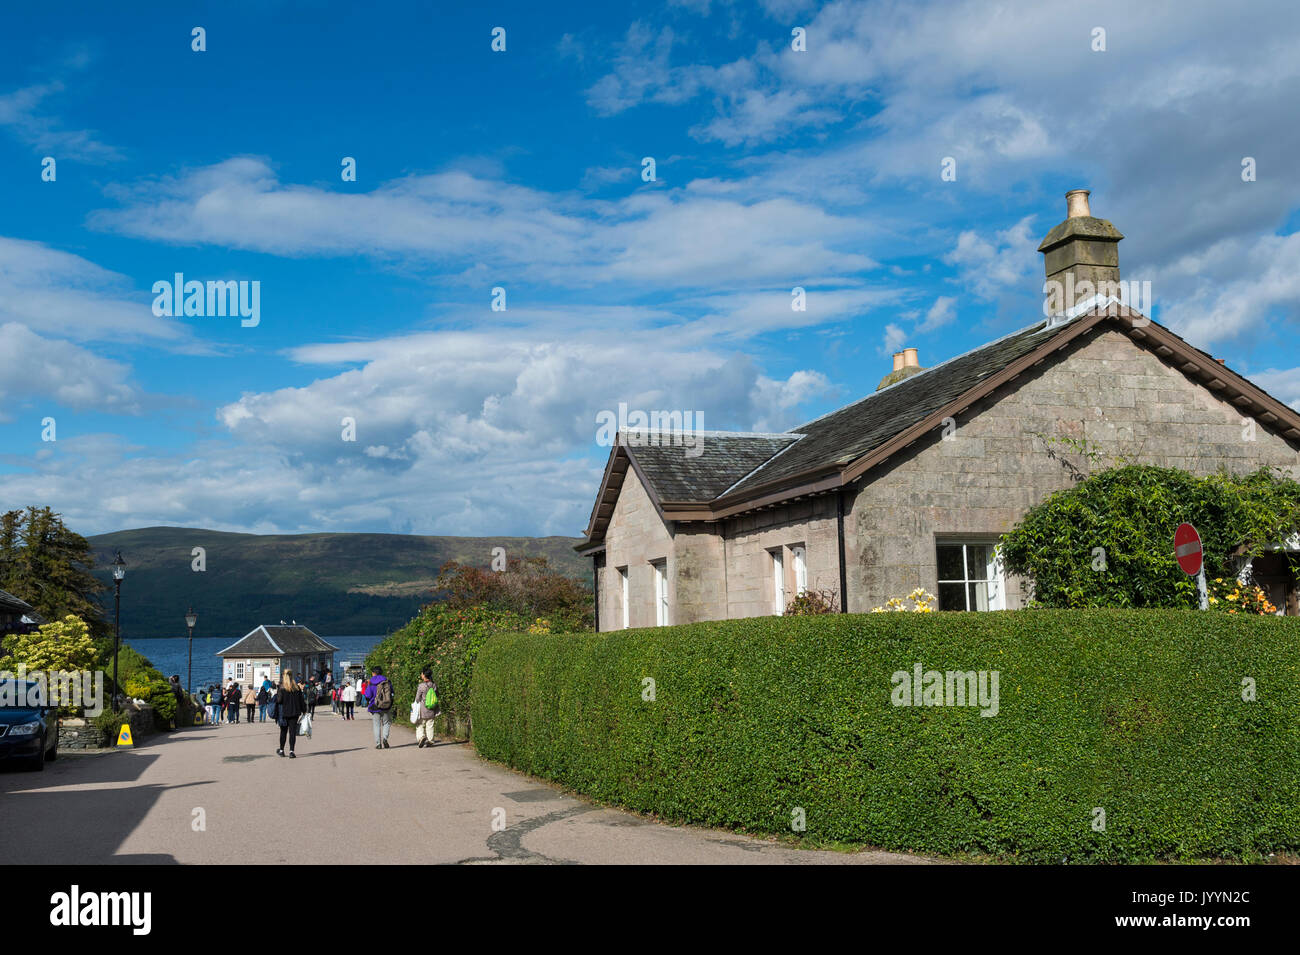 Luss, Scotland, UK - August 8, 2017: Tourists walking in the picturesque village of Luss on the banks of Loch Lomond. Stock Photo